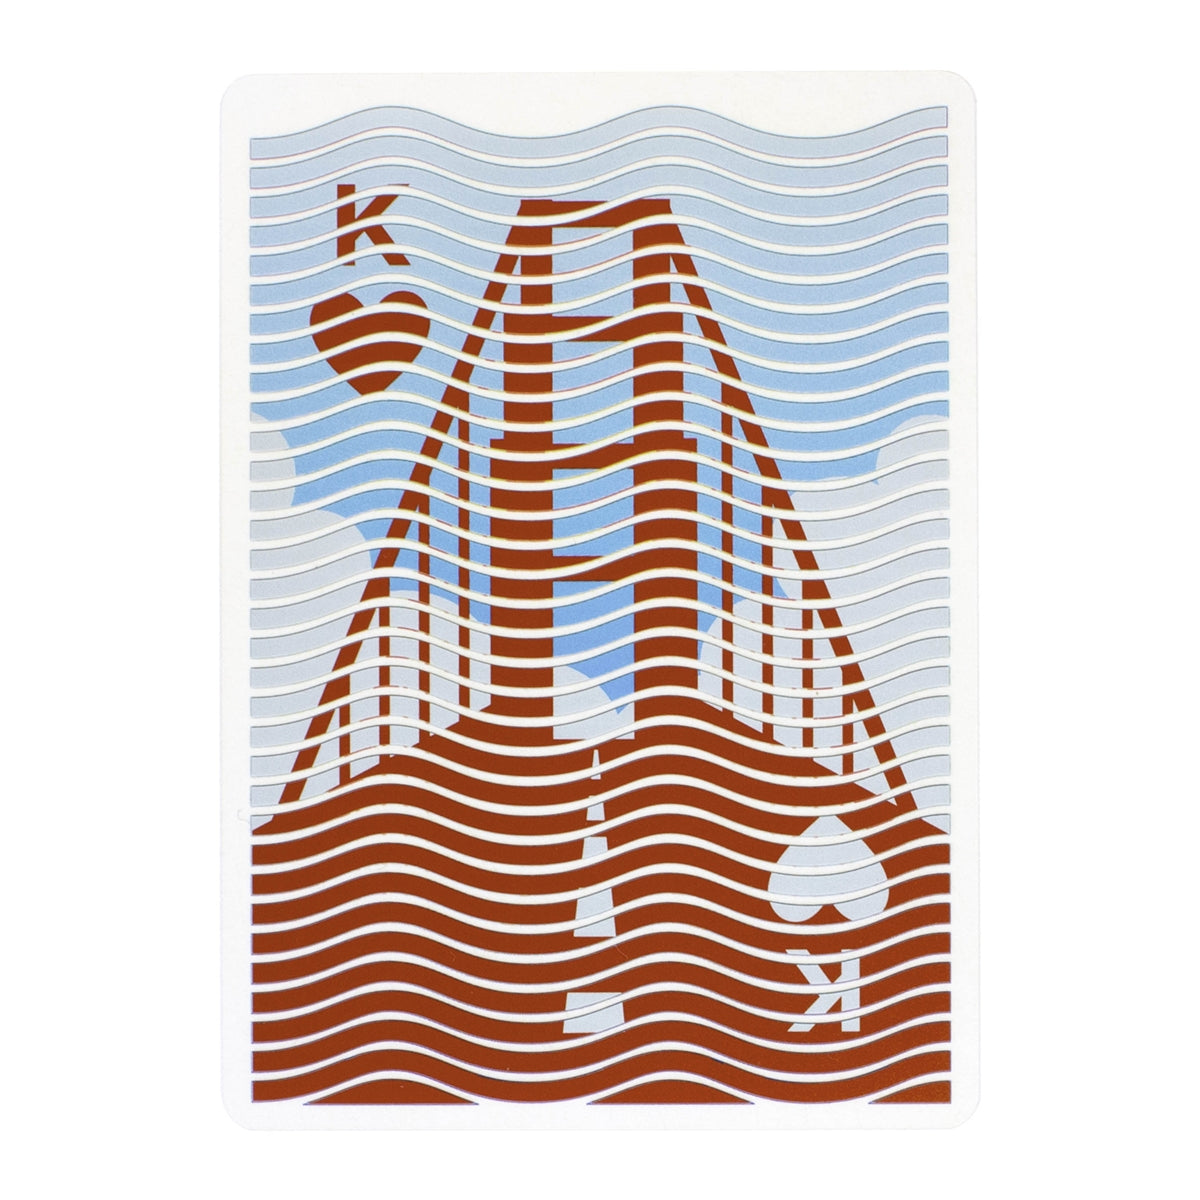 Colorful San Francisco Fog City playing cards with disappearing city landmarks.